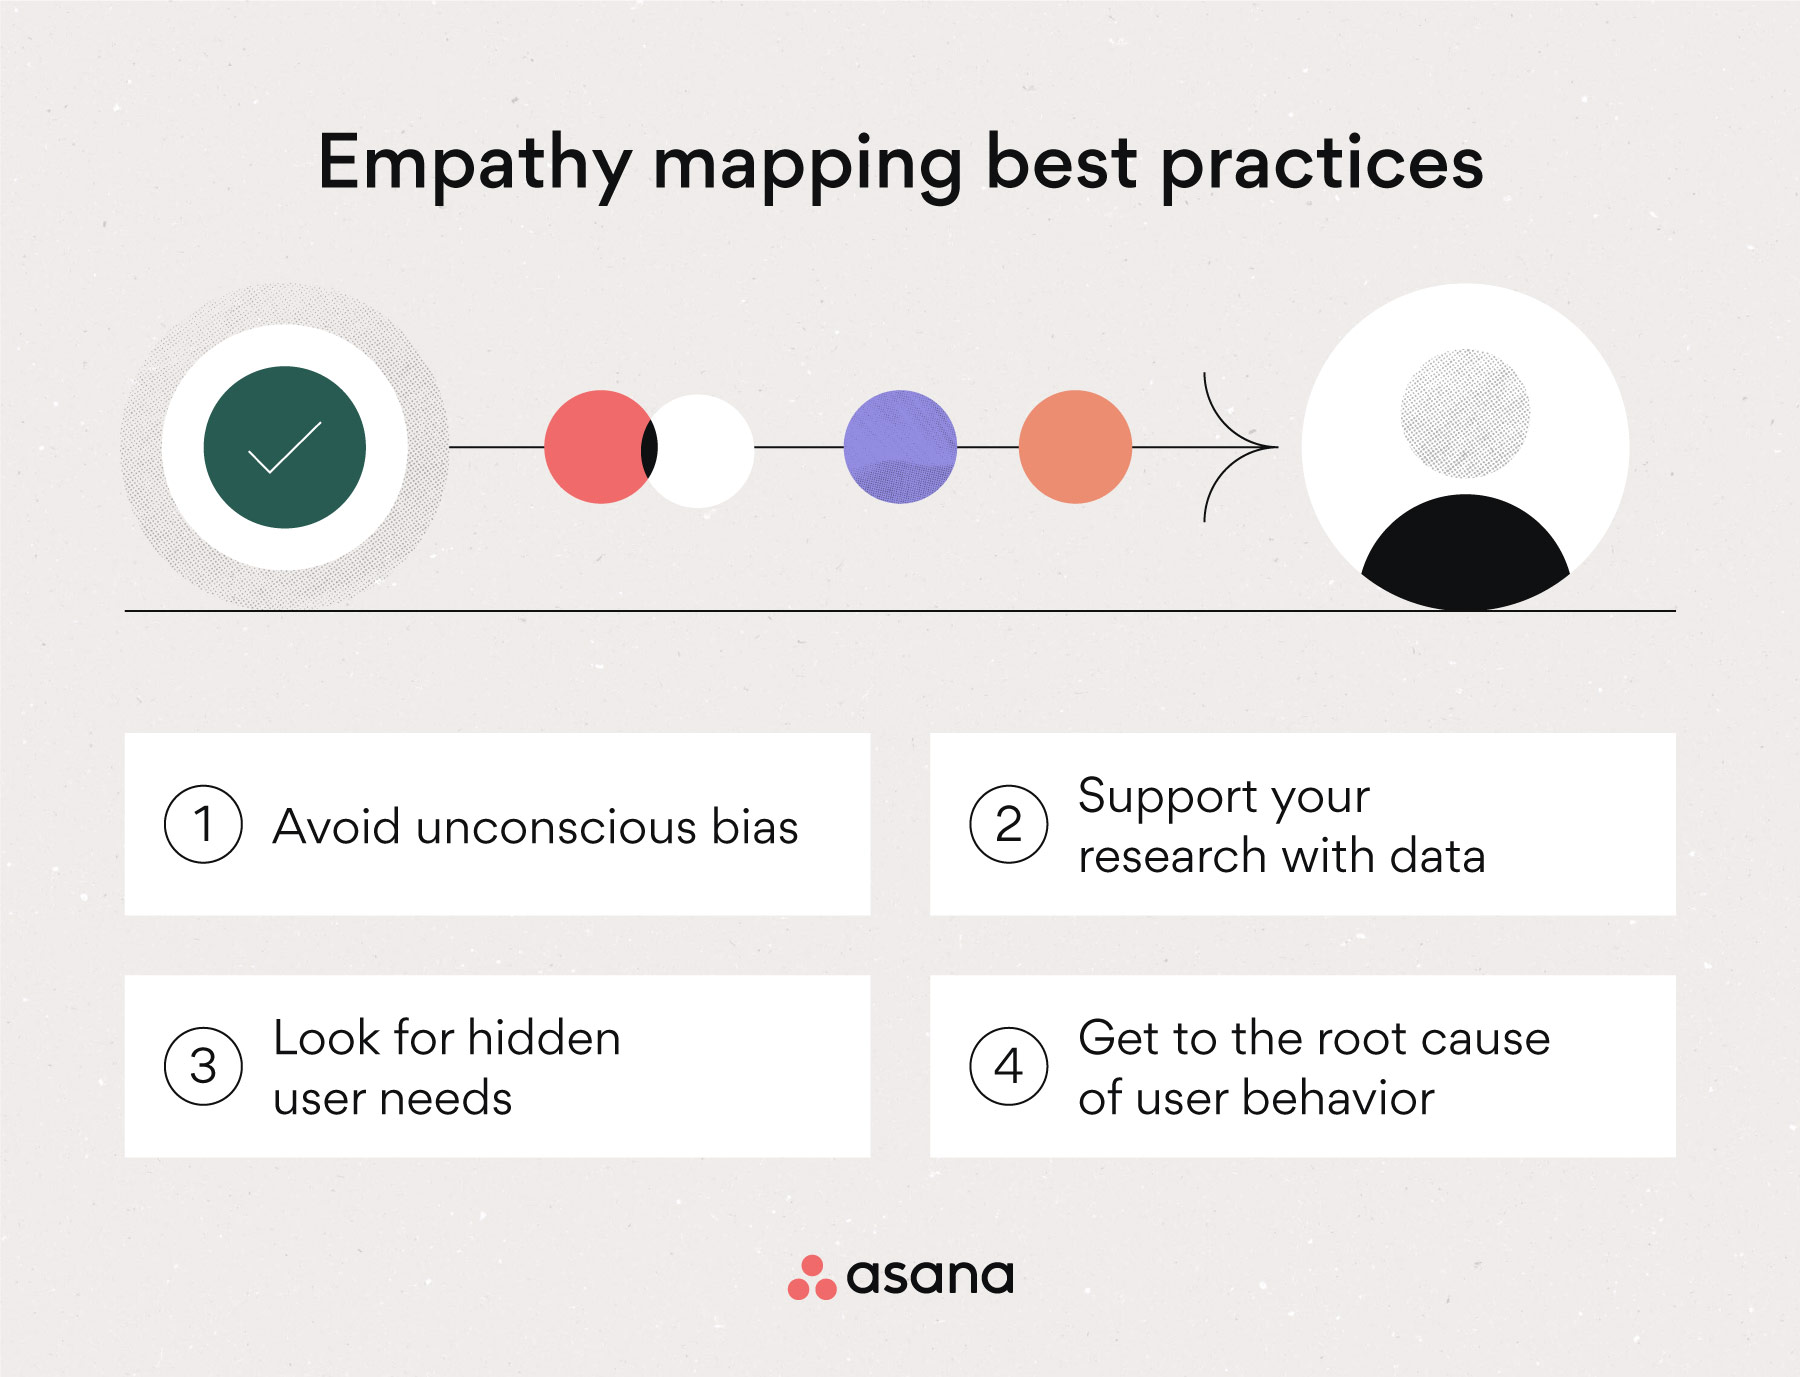 [inline illustration] Empathy mapping best practices (infographic)